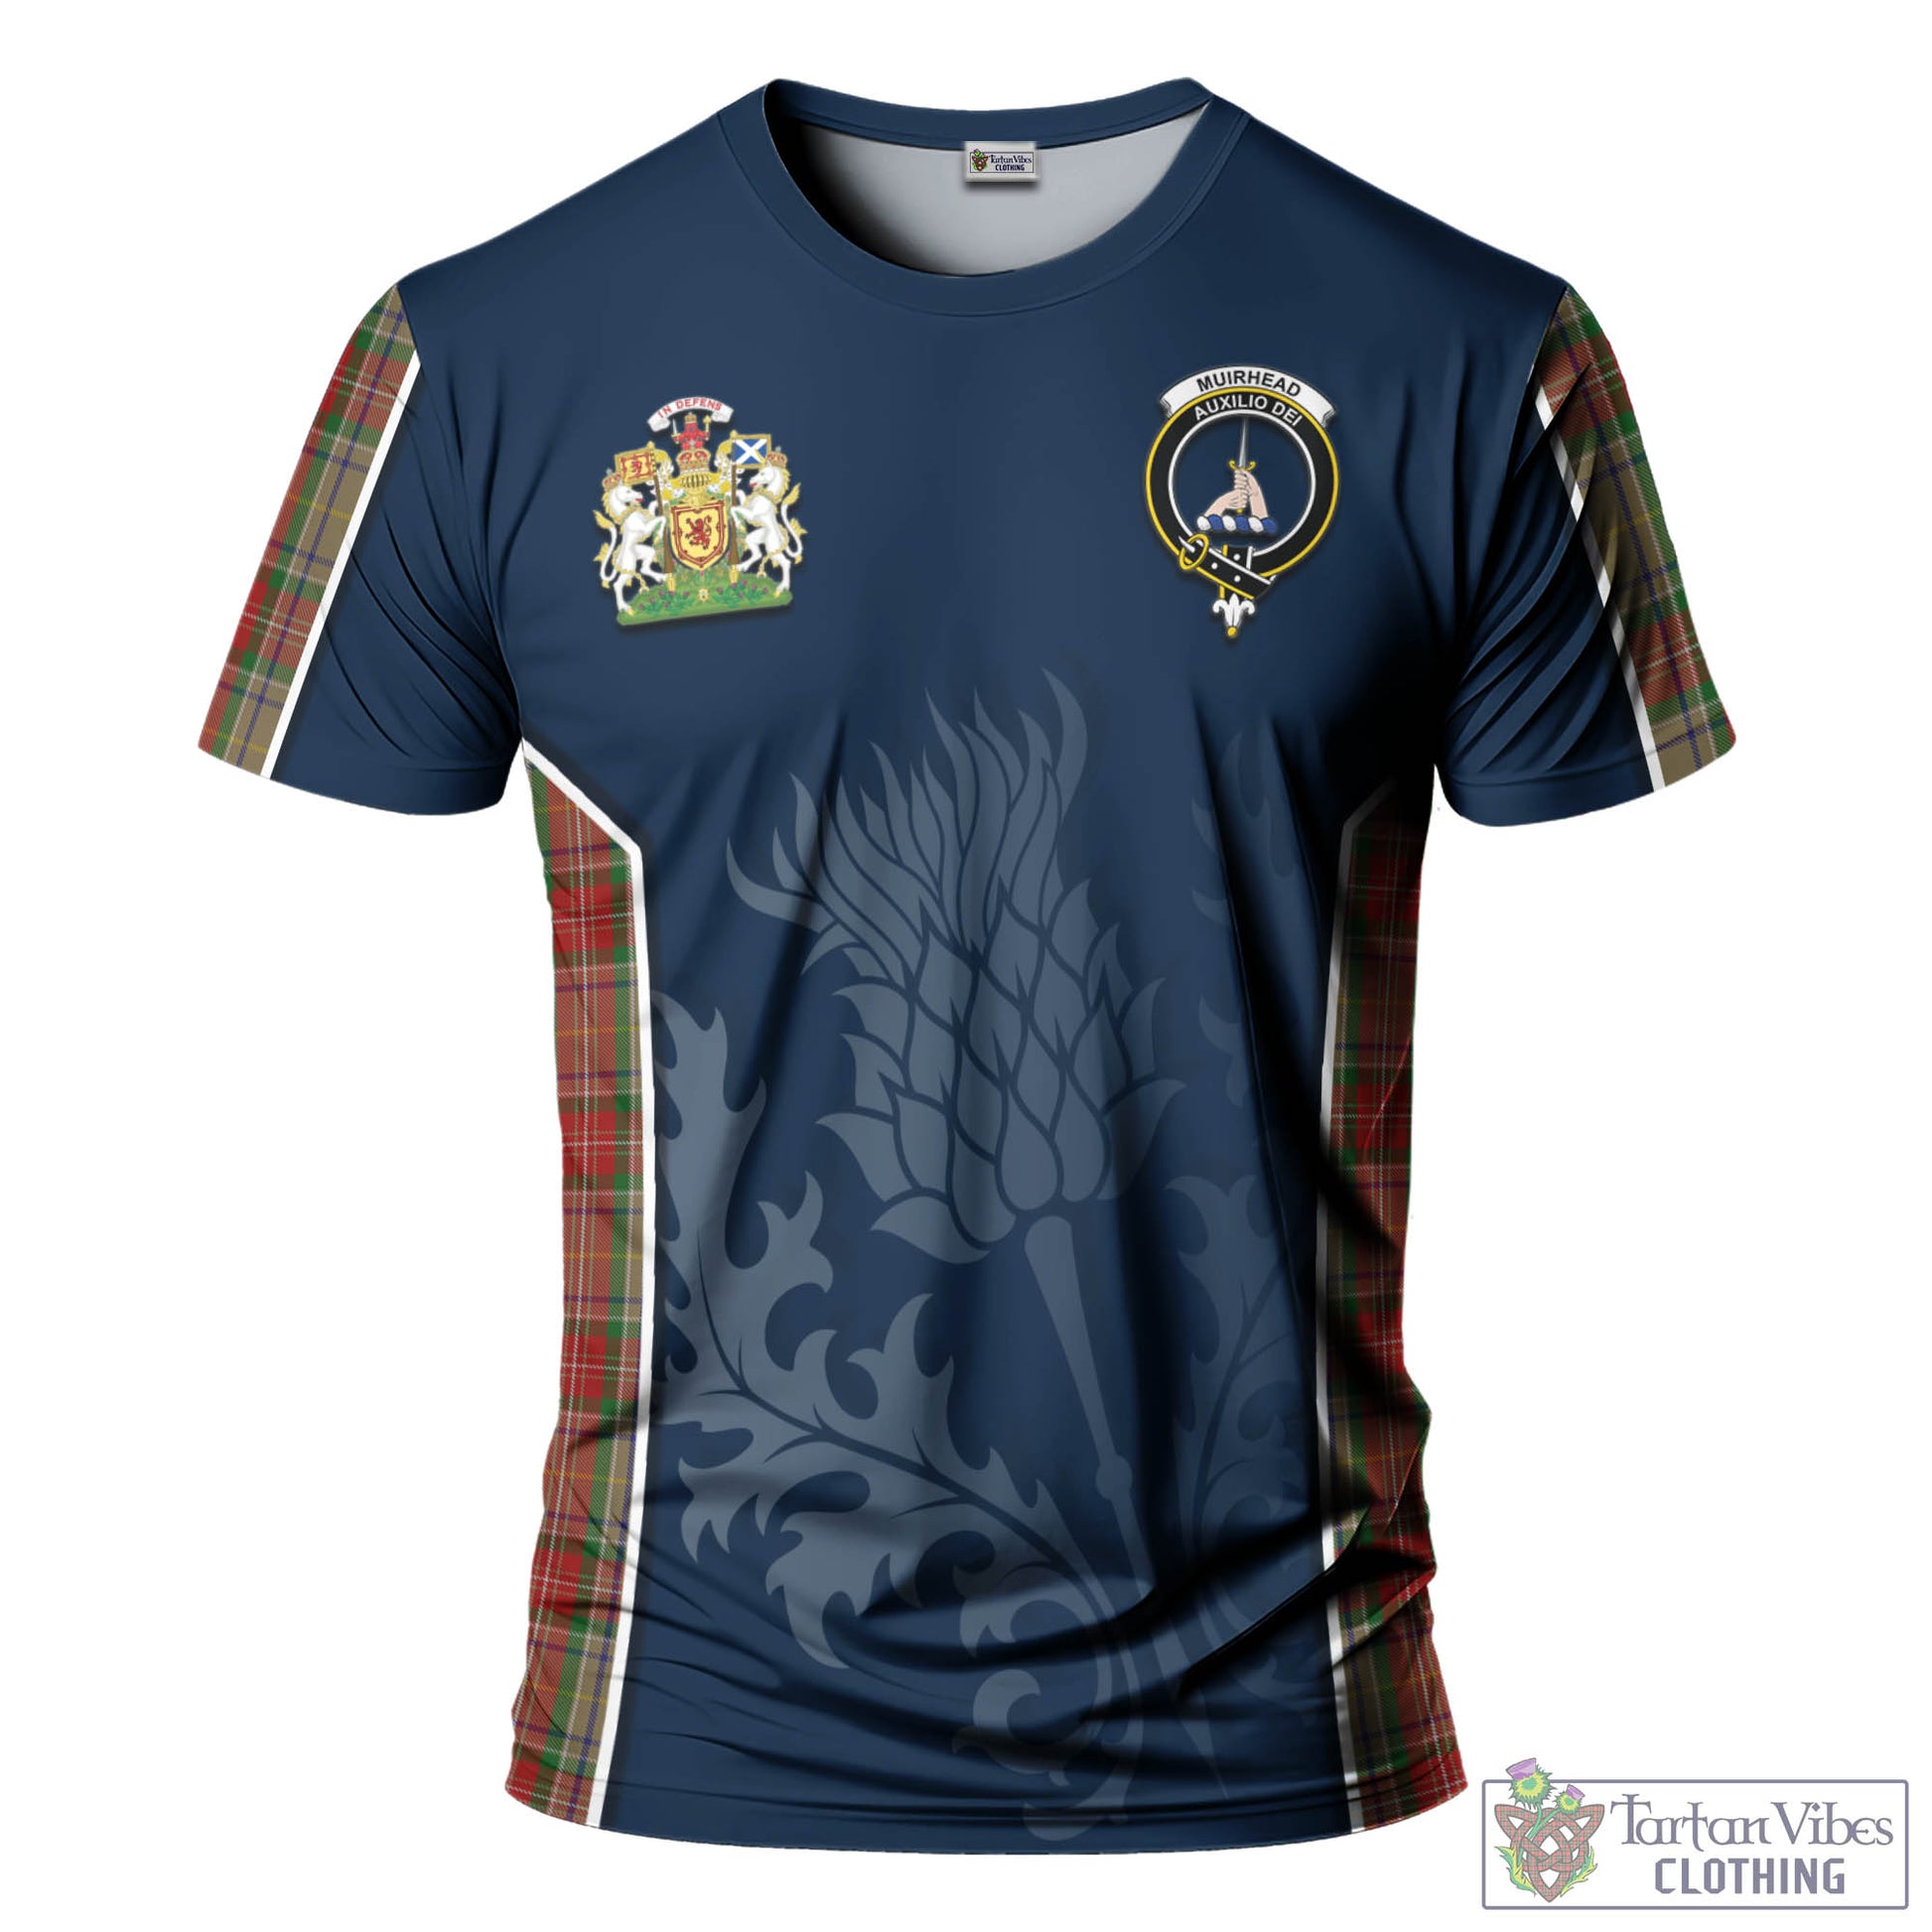 Tartan Vibes Clothing Muirhead Old Tartan T-Shirt with Family Crest and Scottish Thistle Vibes Sport Style